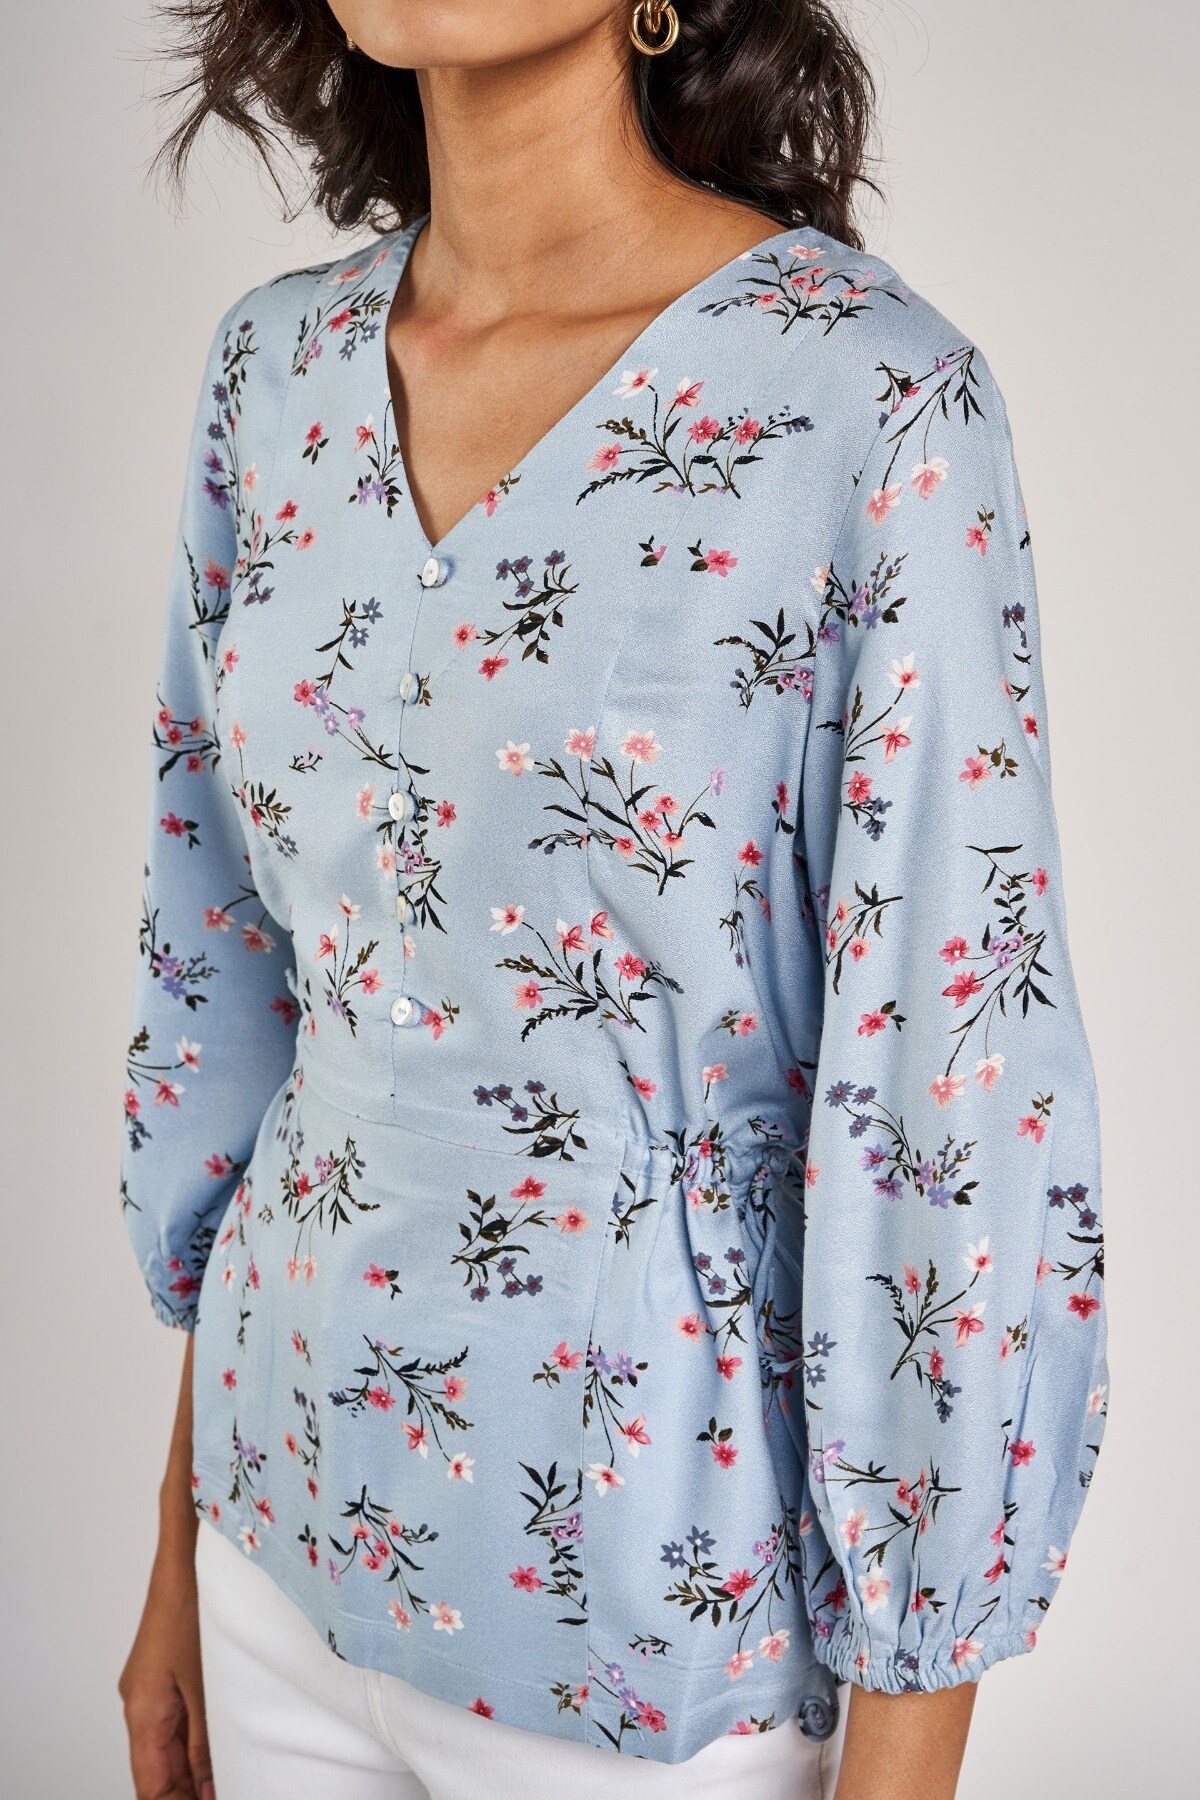 AND | Powder Blue Floral Printed Peplum Top 5